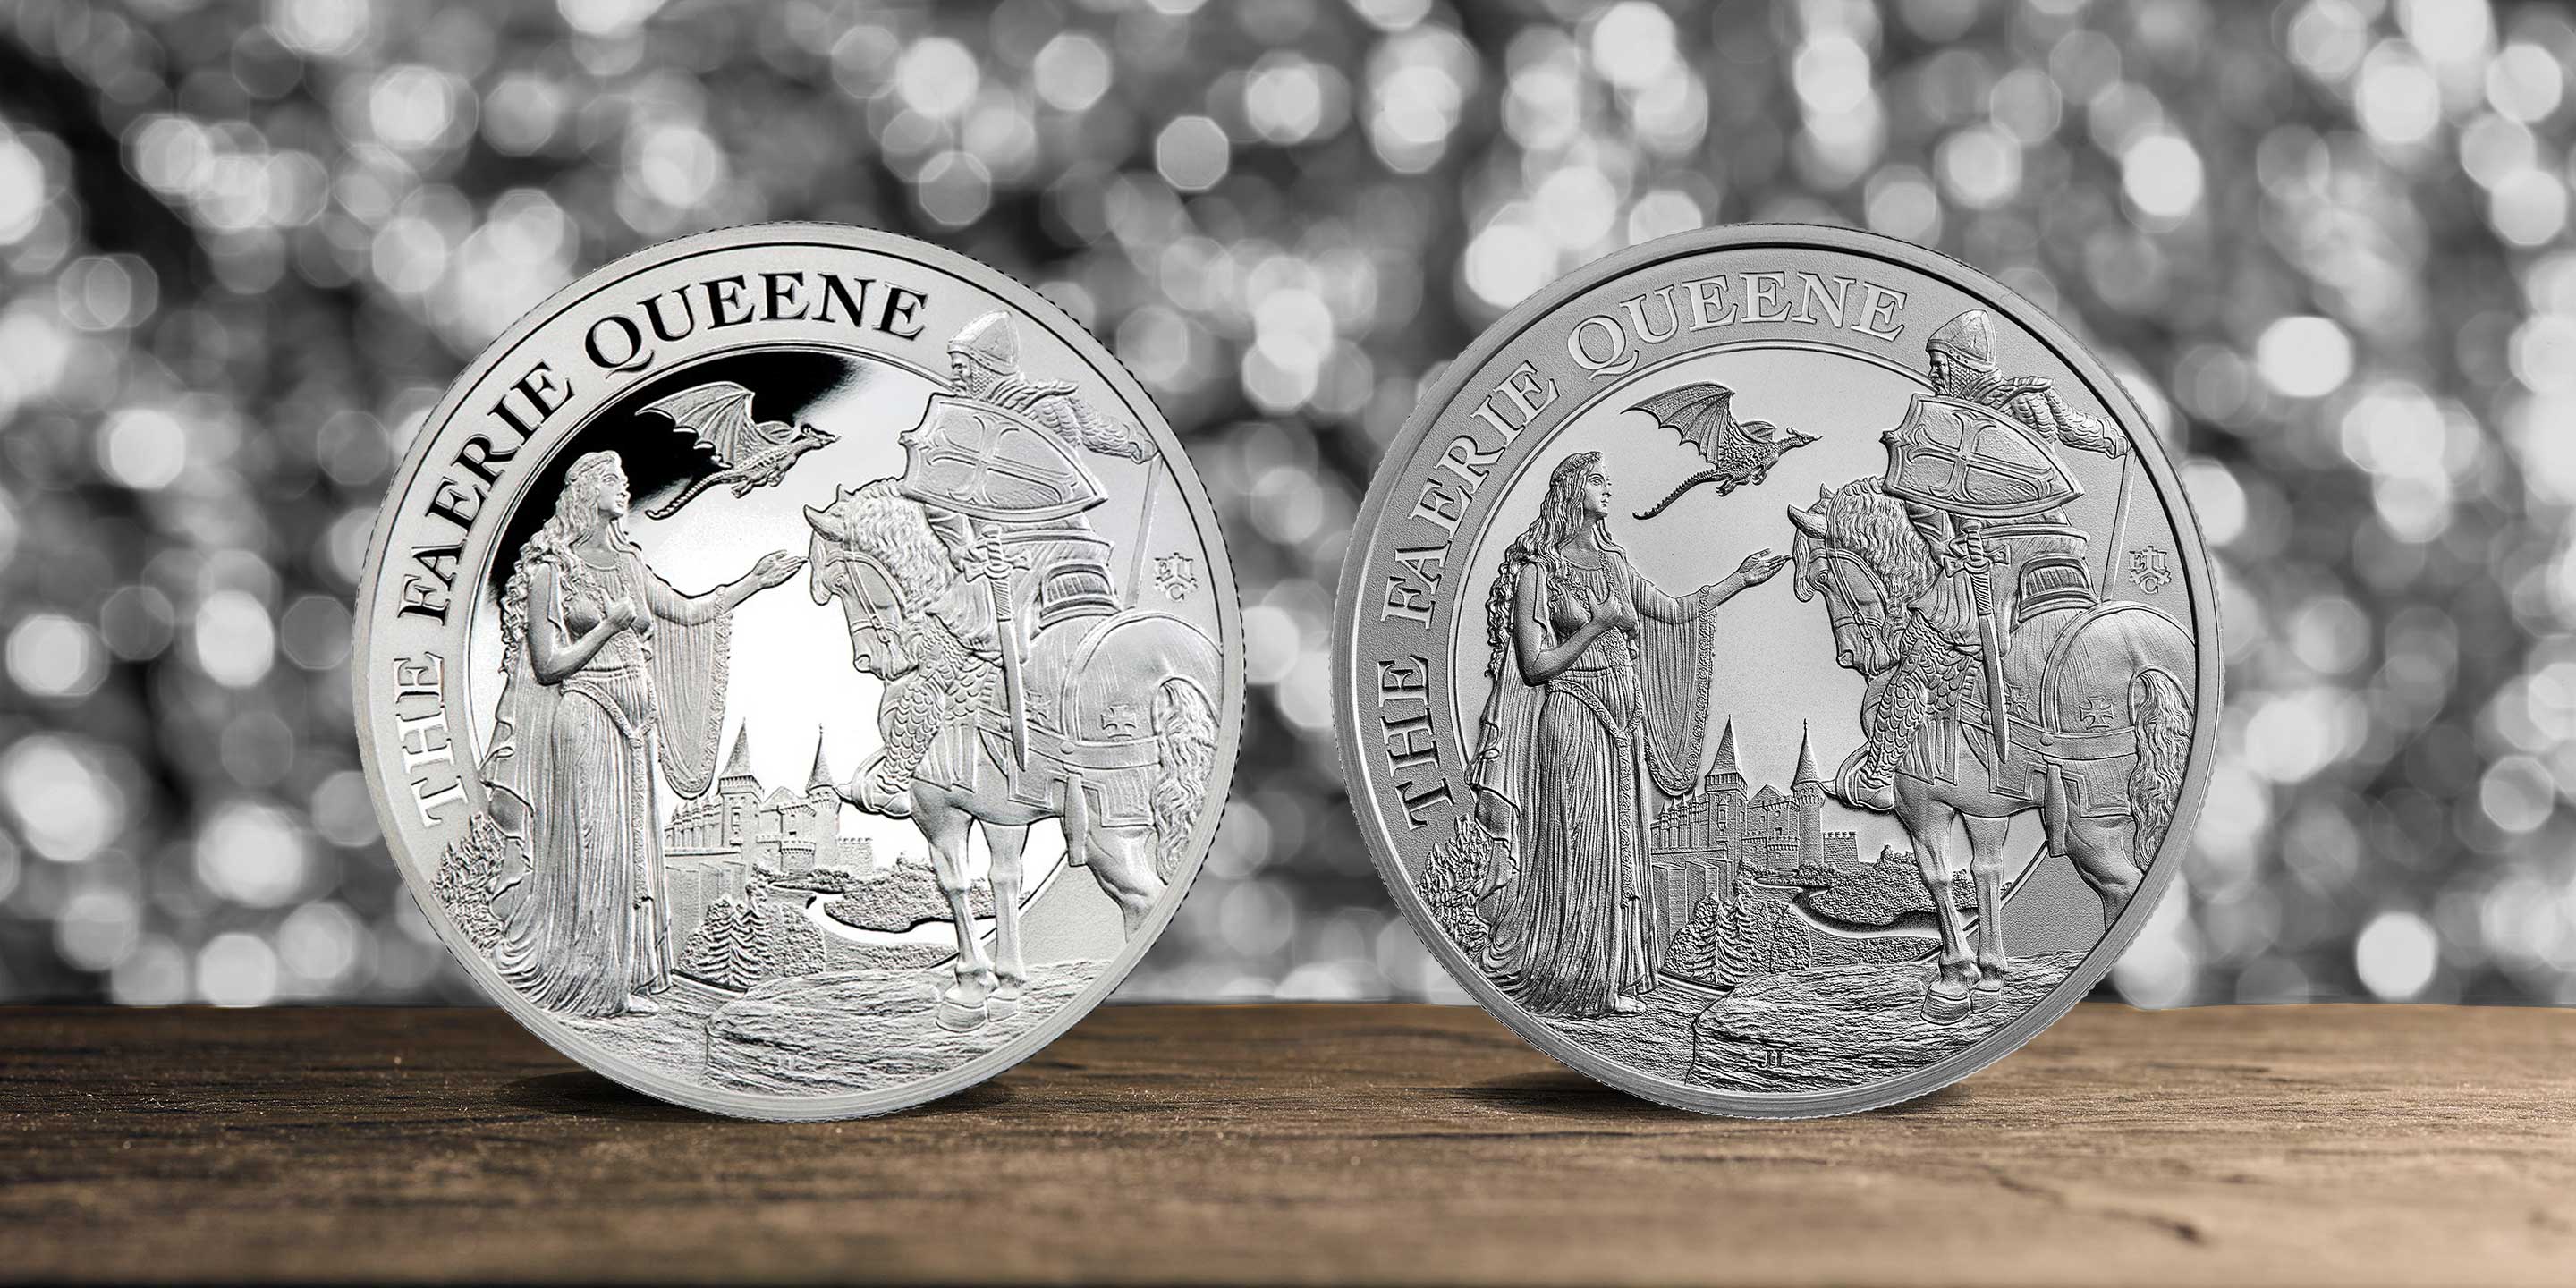 A brief history of Brilliant Uncirculated coins